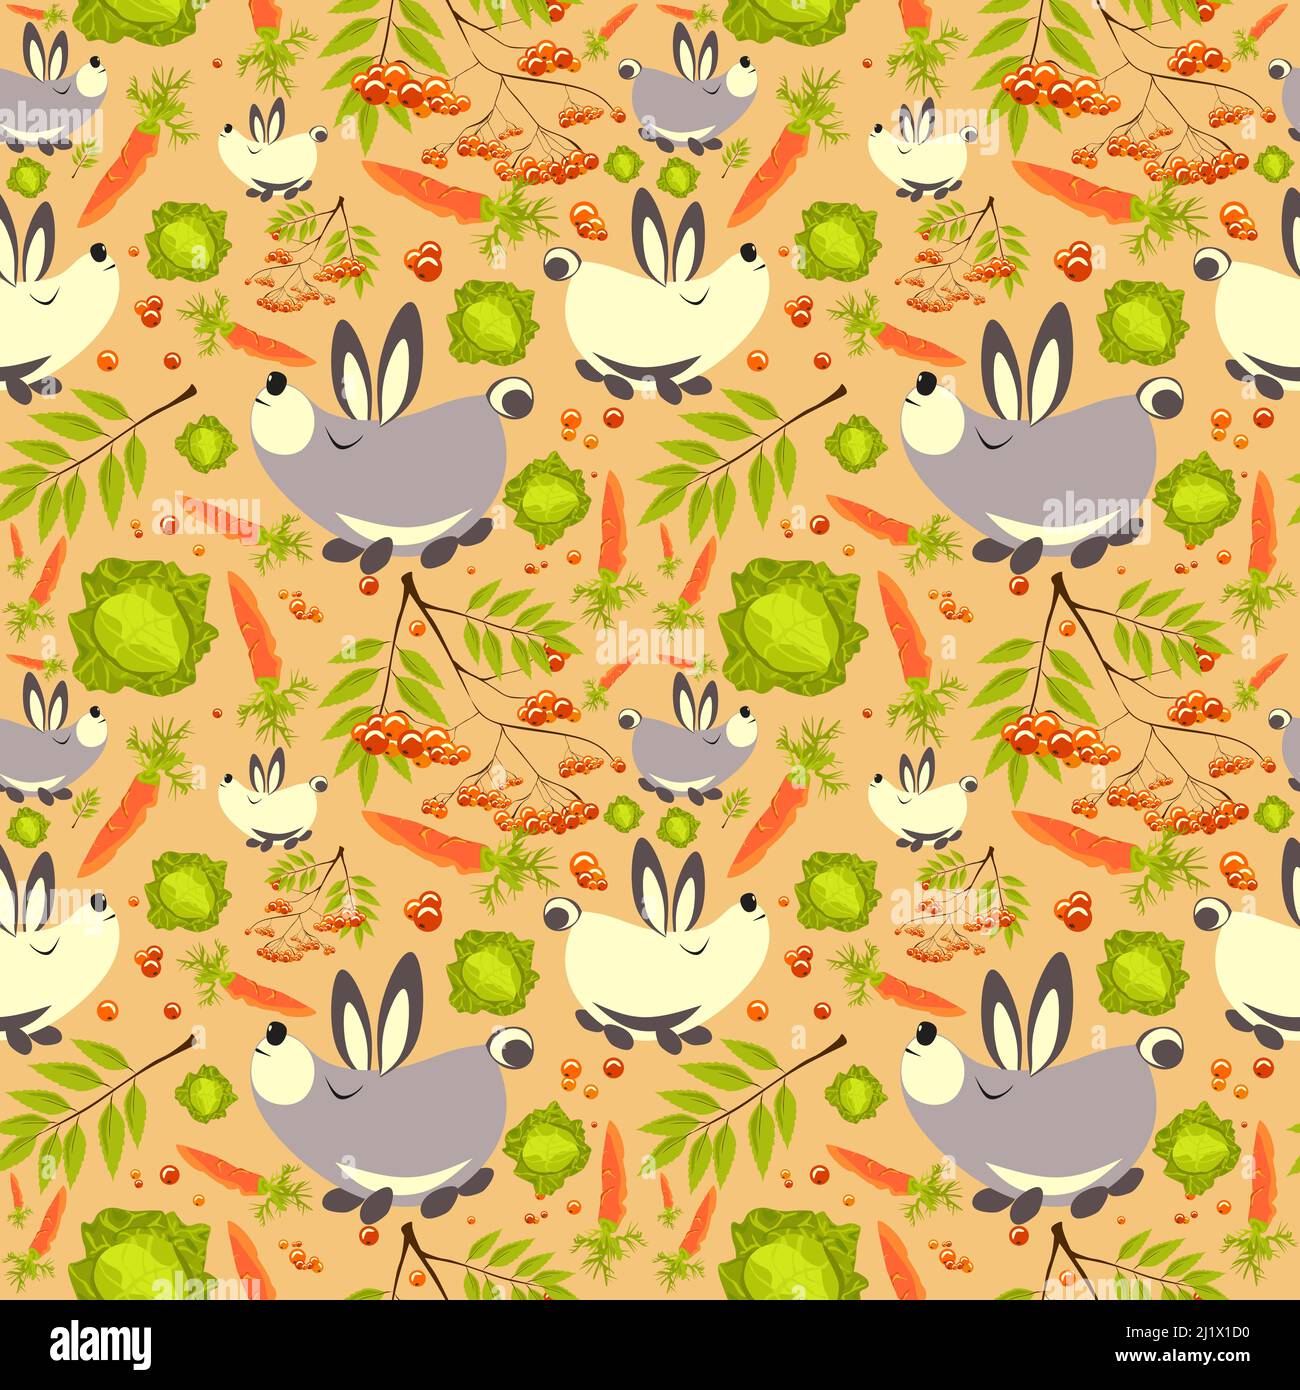 Forest pattern with animals and plants. Seamless pattern for fabric, paper and other printing and web projects. Stock Vector